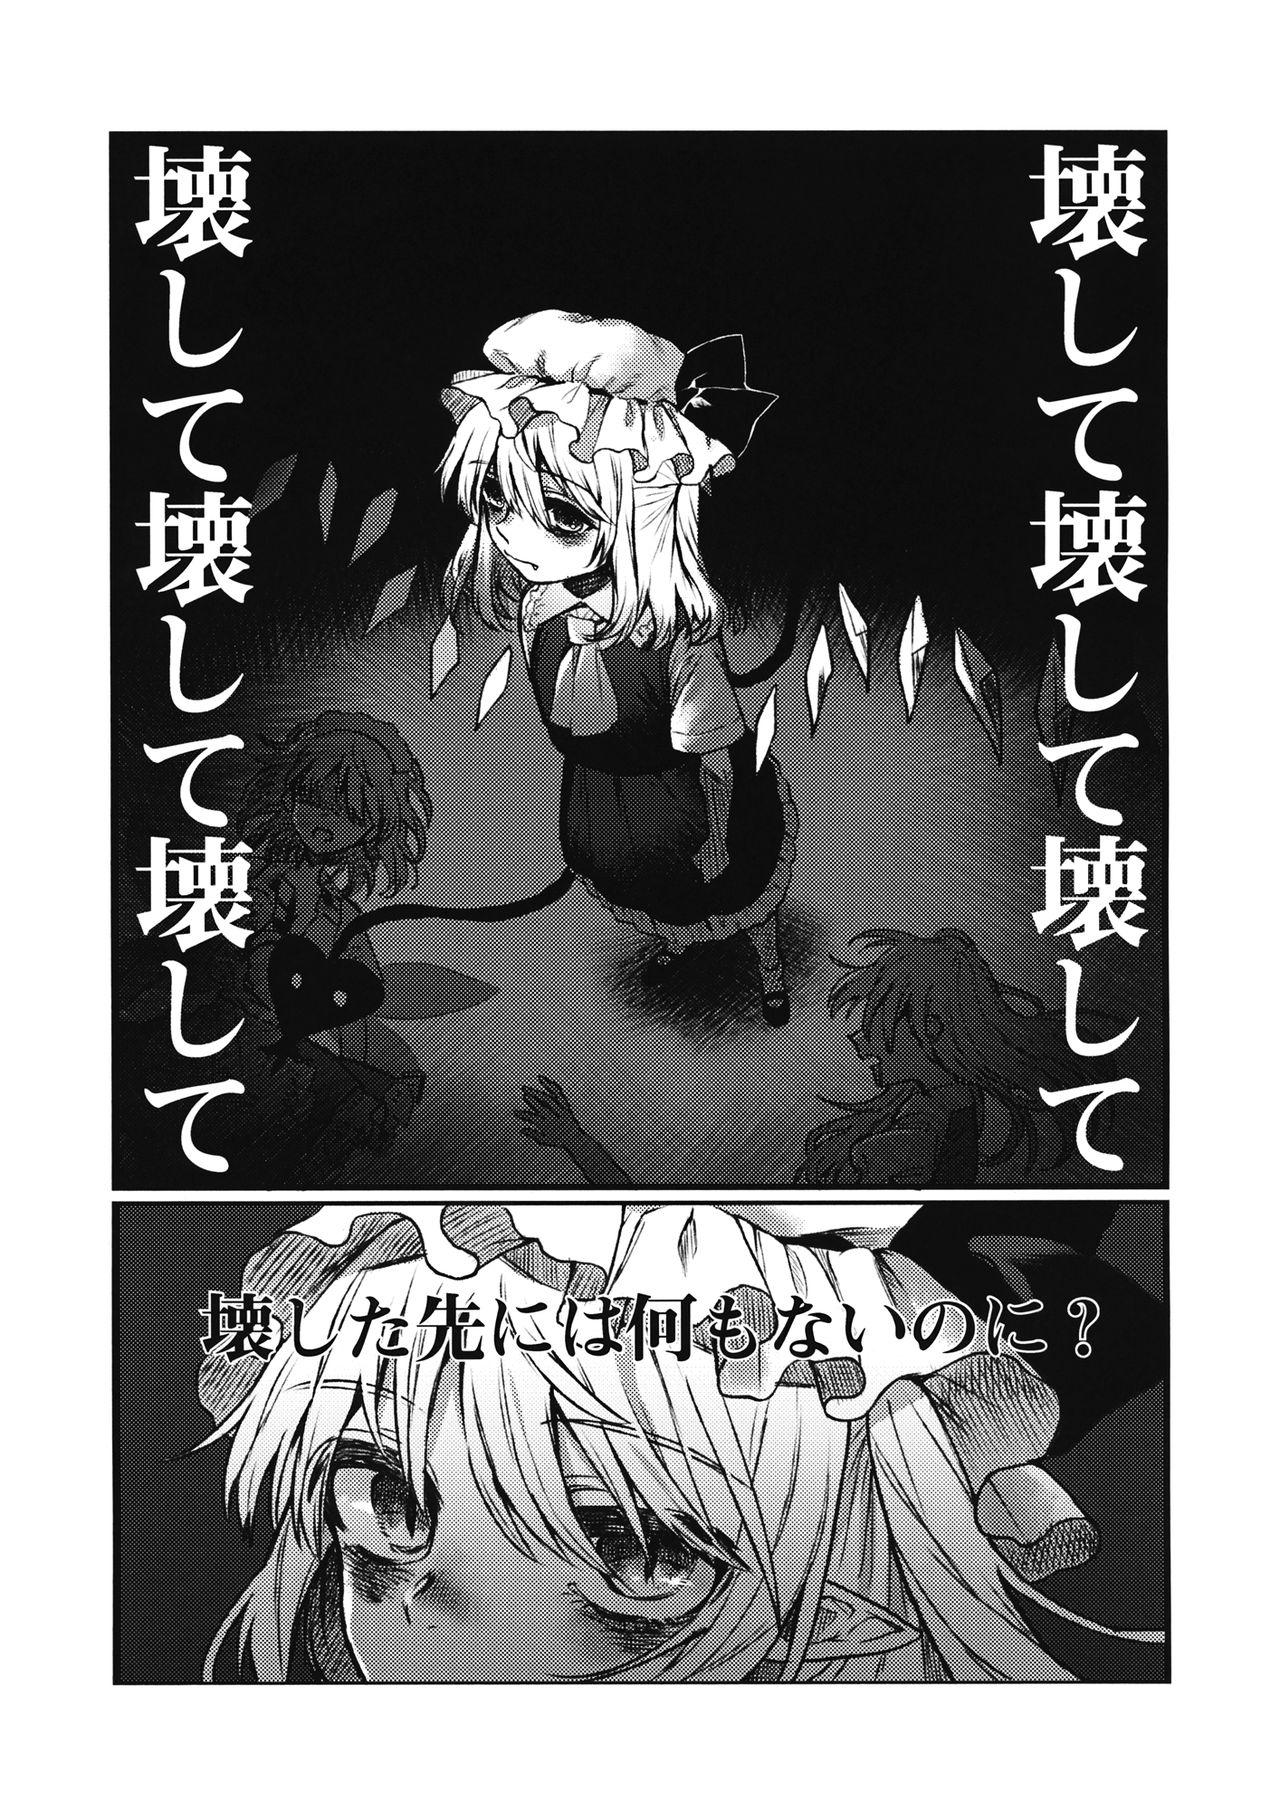 Free Fucking Maid Flandre Kansatsu Nikki - Maid Flandre observation diary - Touhou project Girl On Girl - Page 2